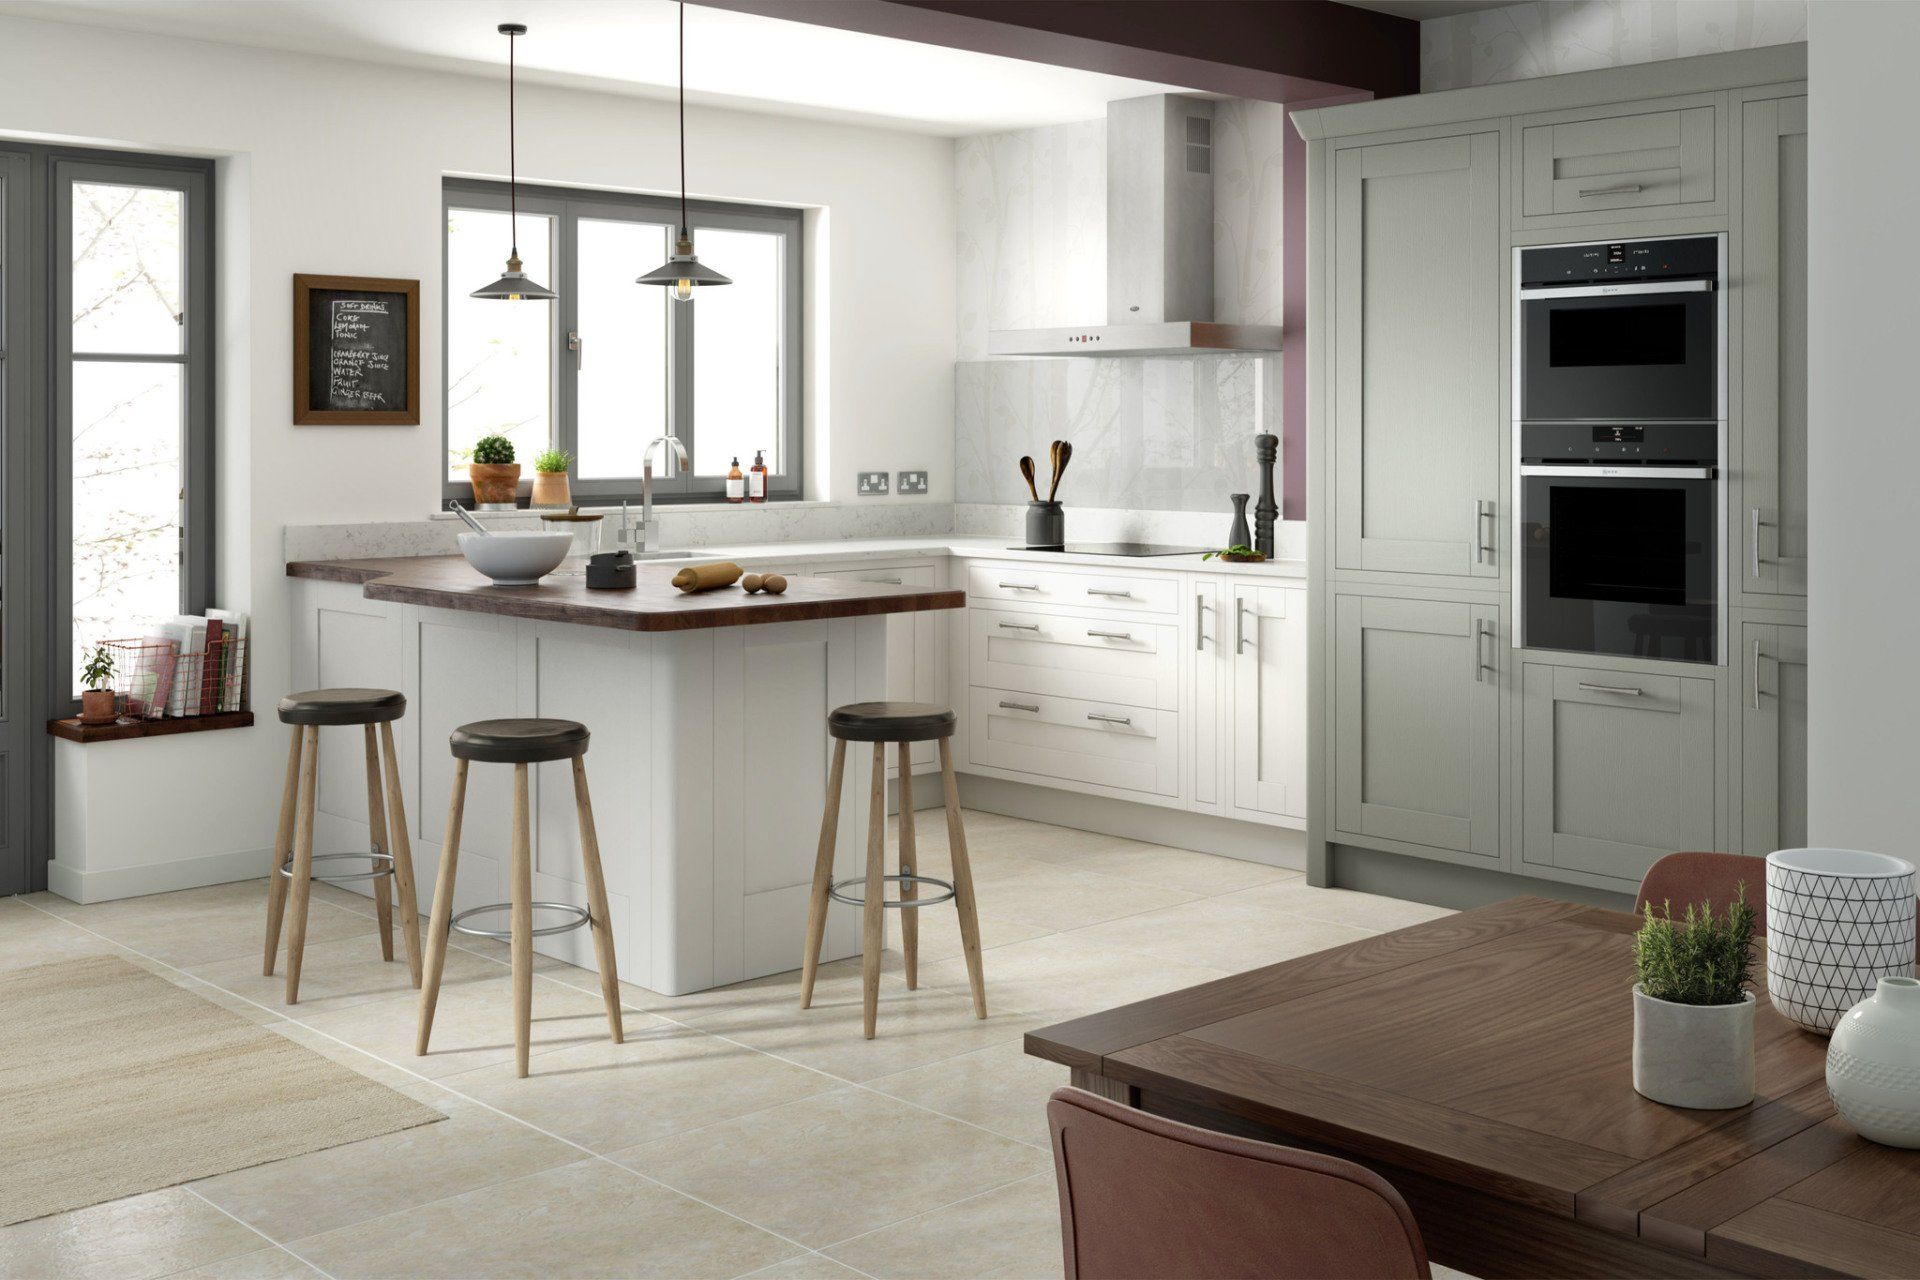 Bespoke kitchens designed and fitted throughout South Yorkshire and the surrounding areas